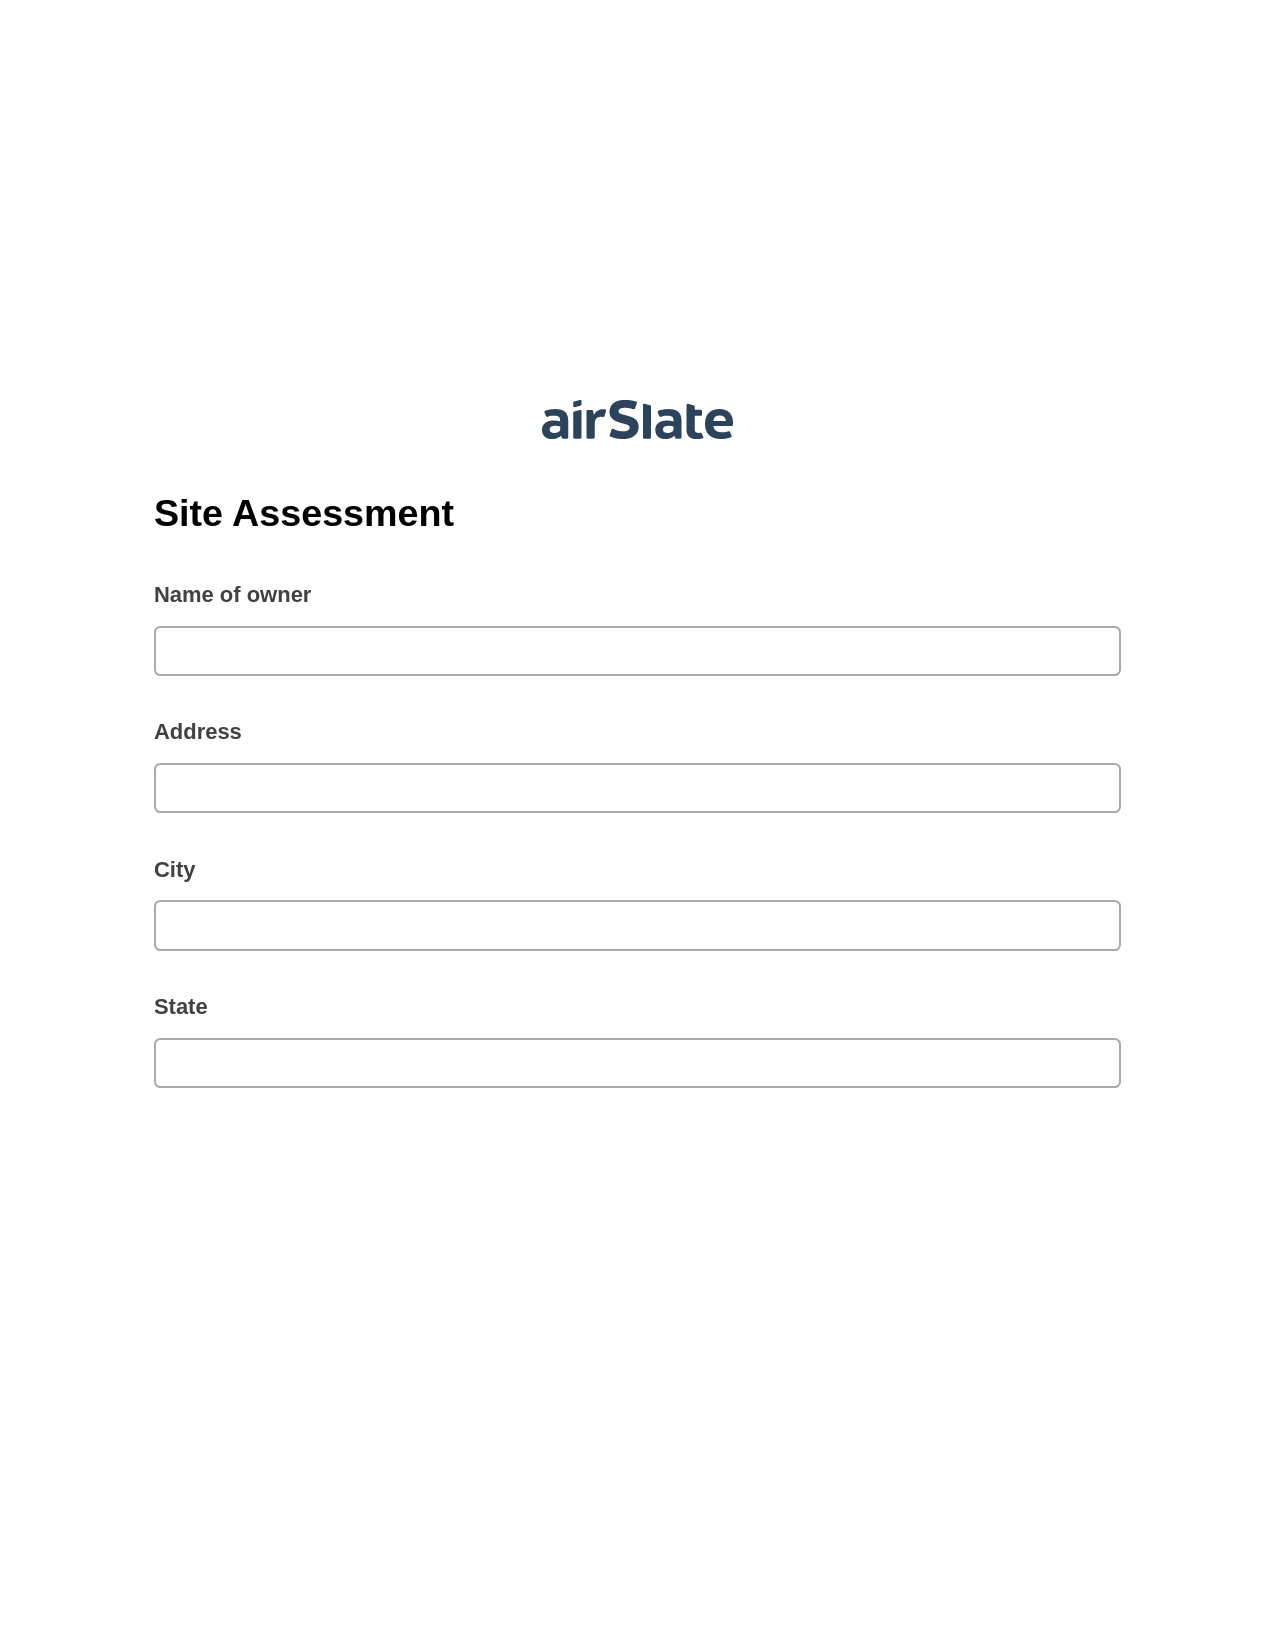 Site Assessment Pre-fill from Salesforce Records with SOQL Bot, Create Slate Reminder Bot, Export to Excel 365 Bot